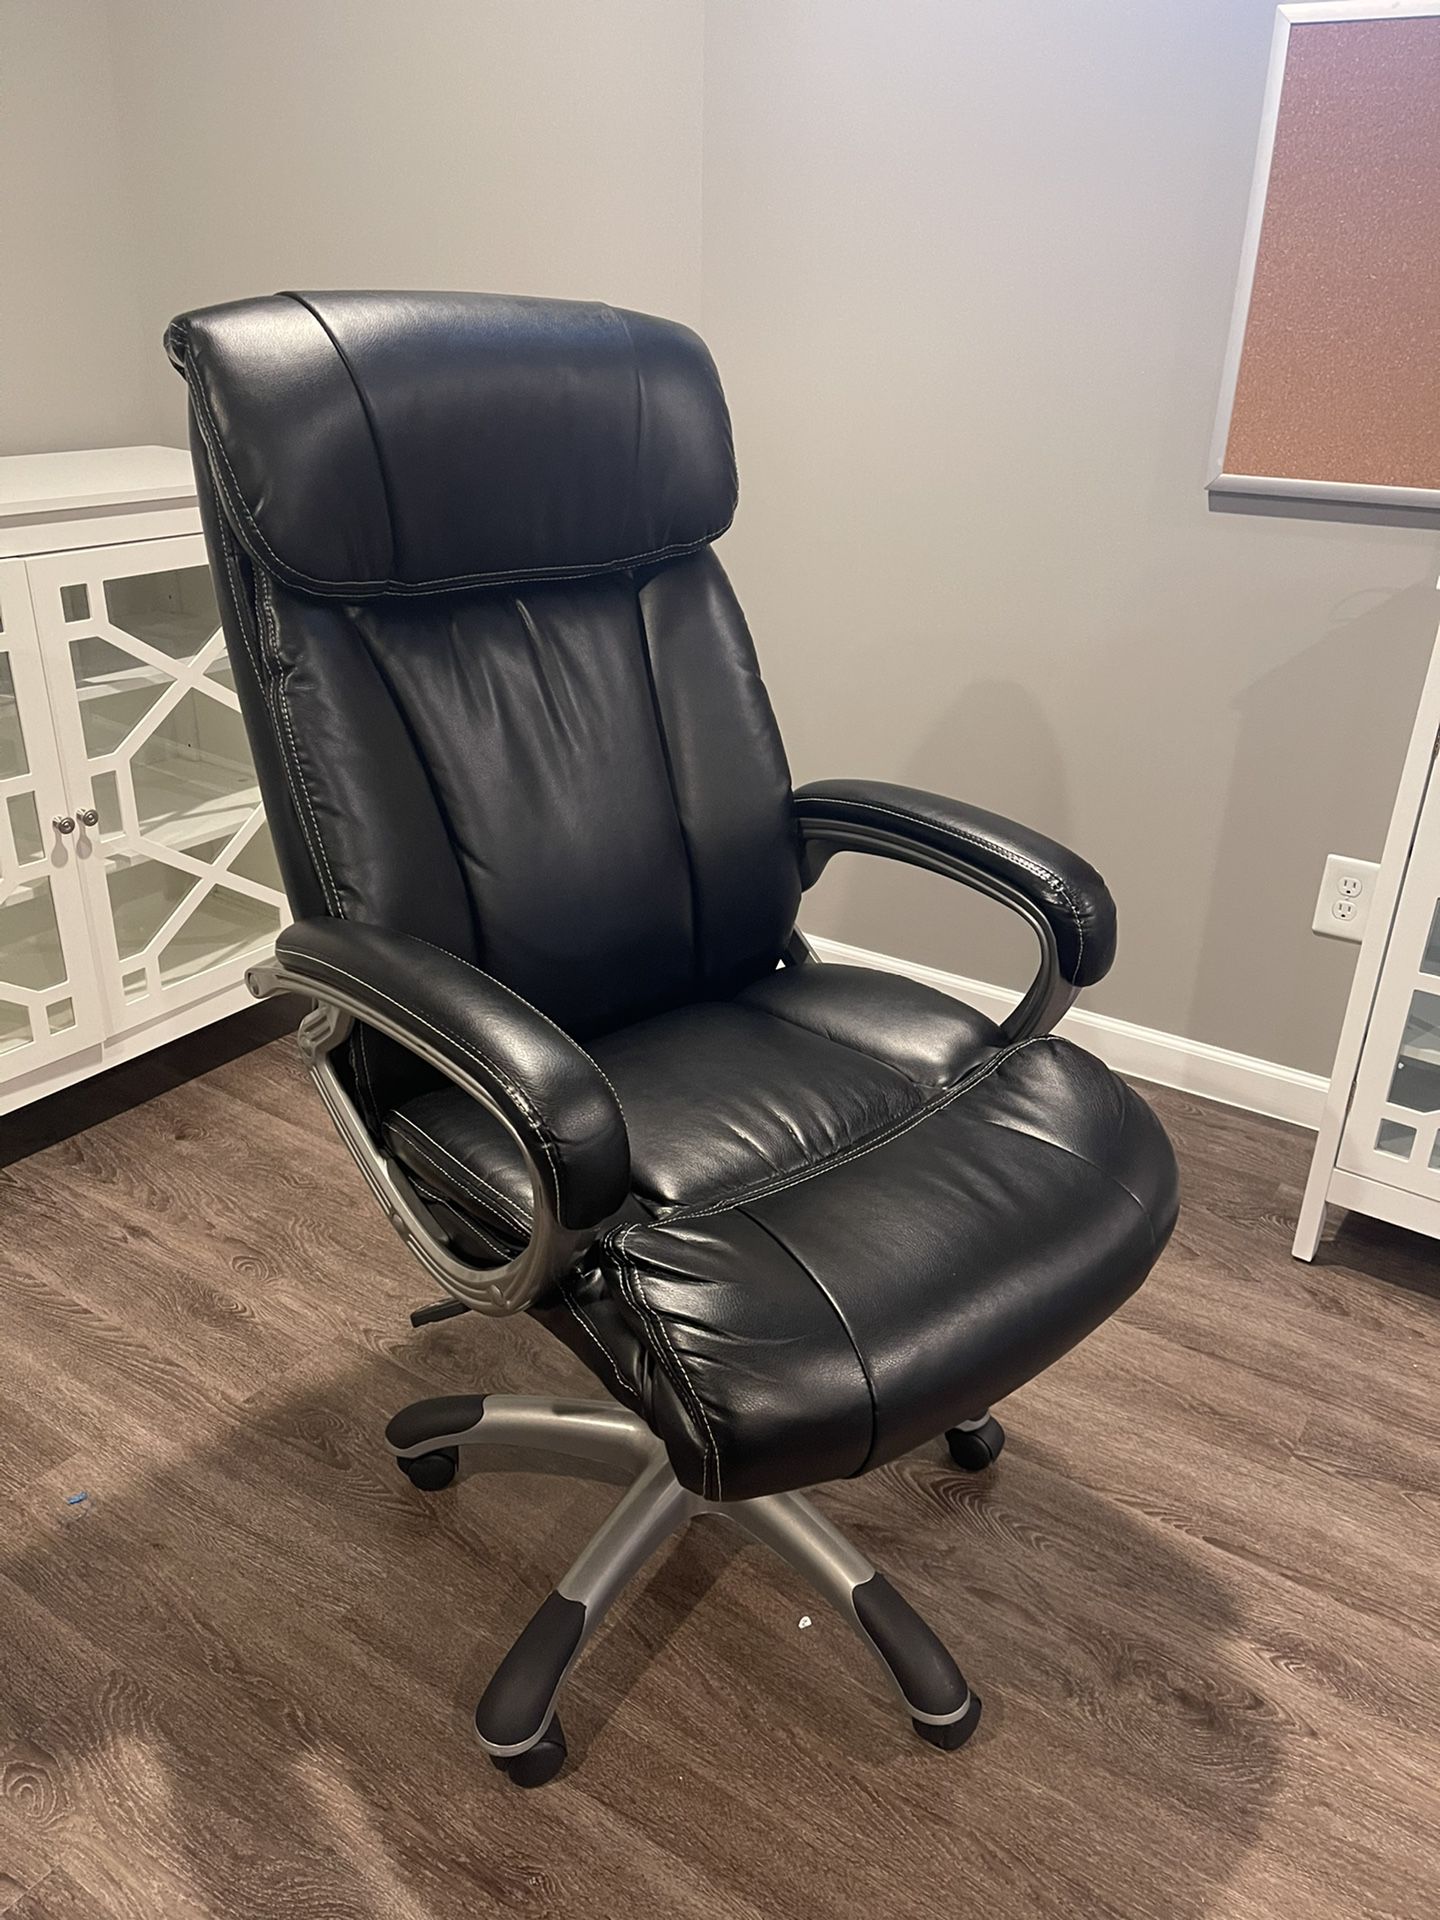 Black Leather Office Chair Like New!